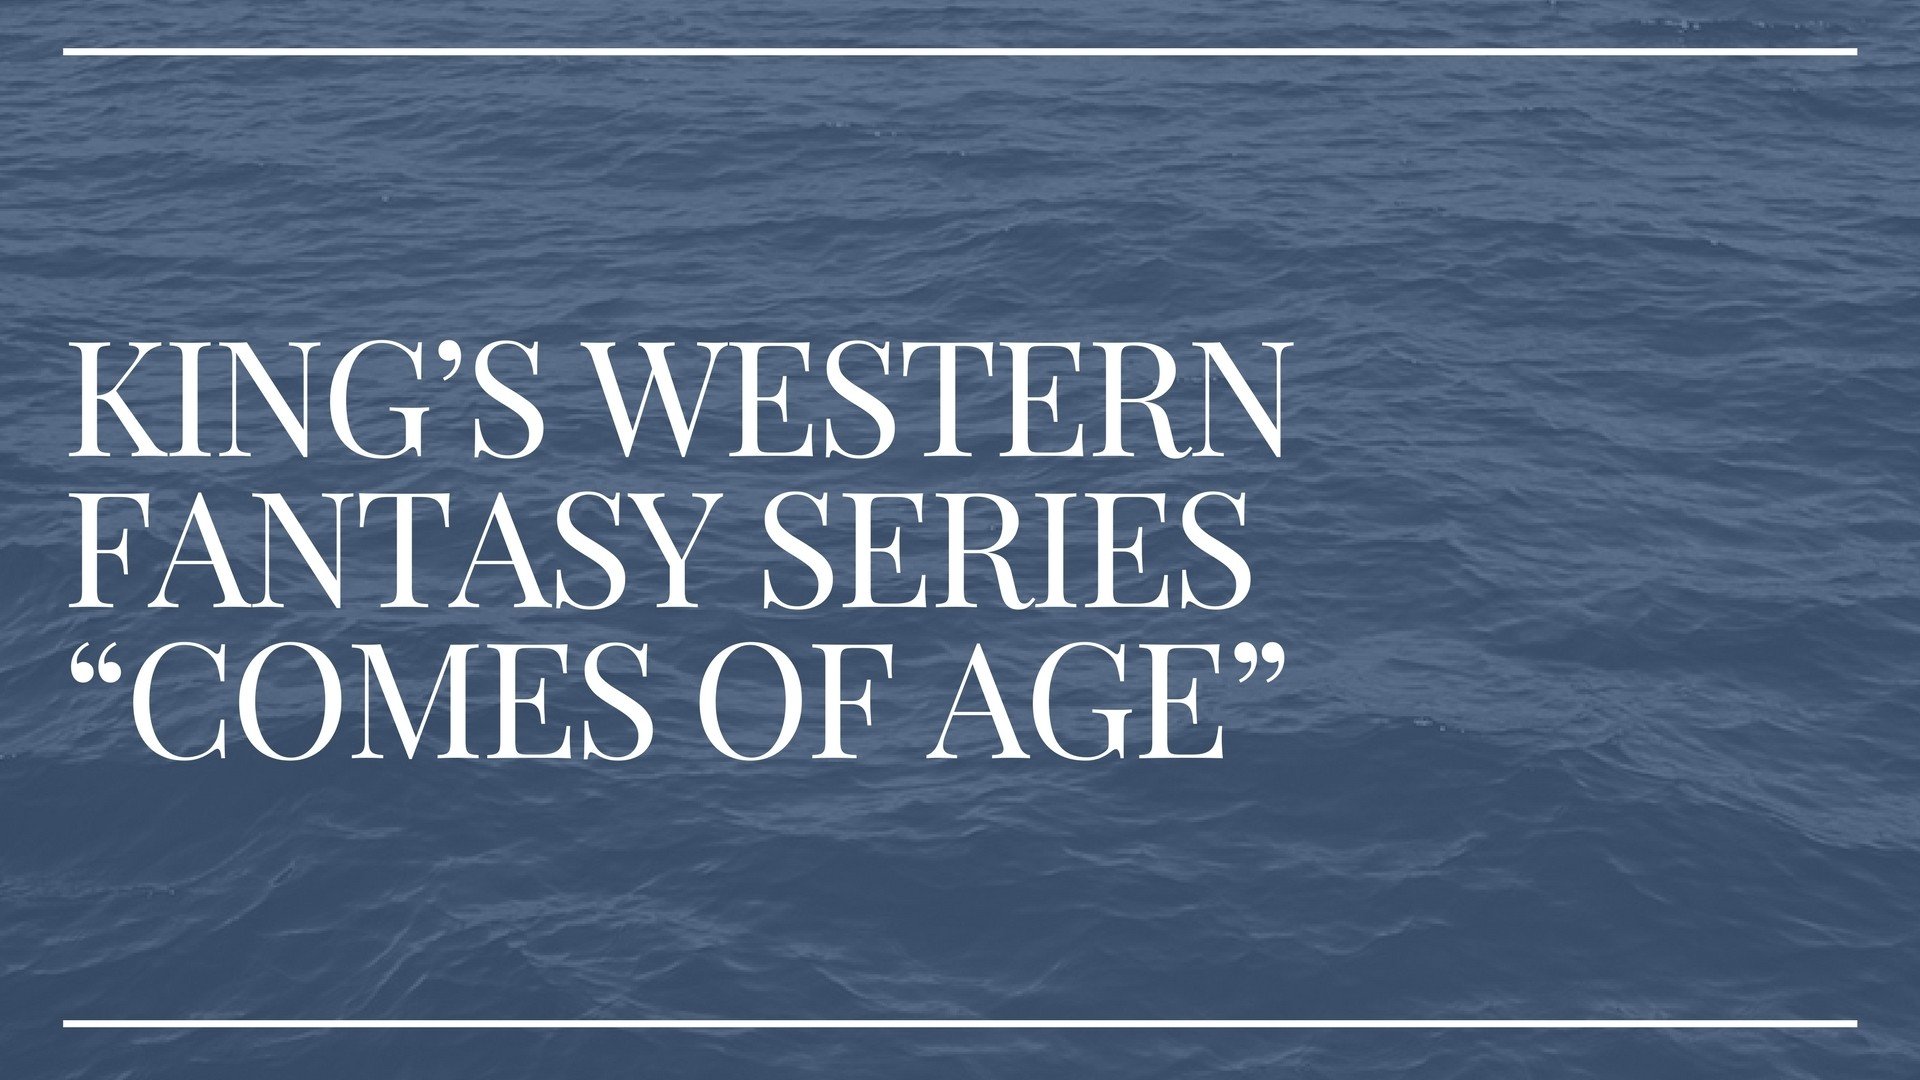 King’s Western Fantasy Series “Comes of Age”